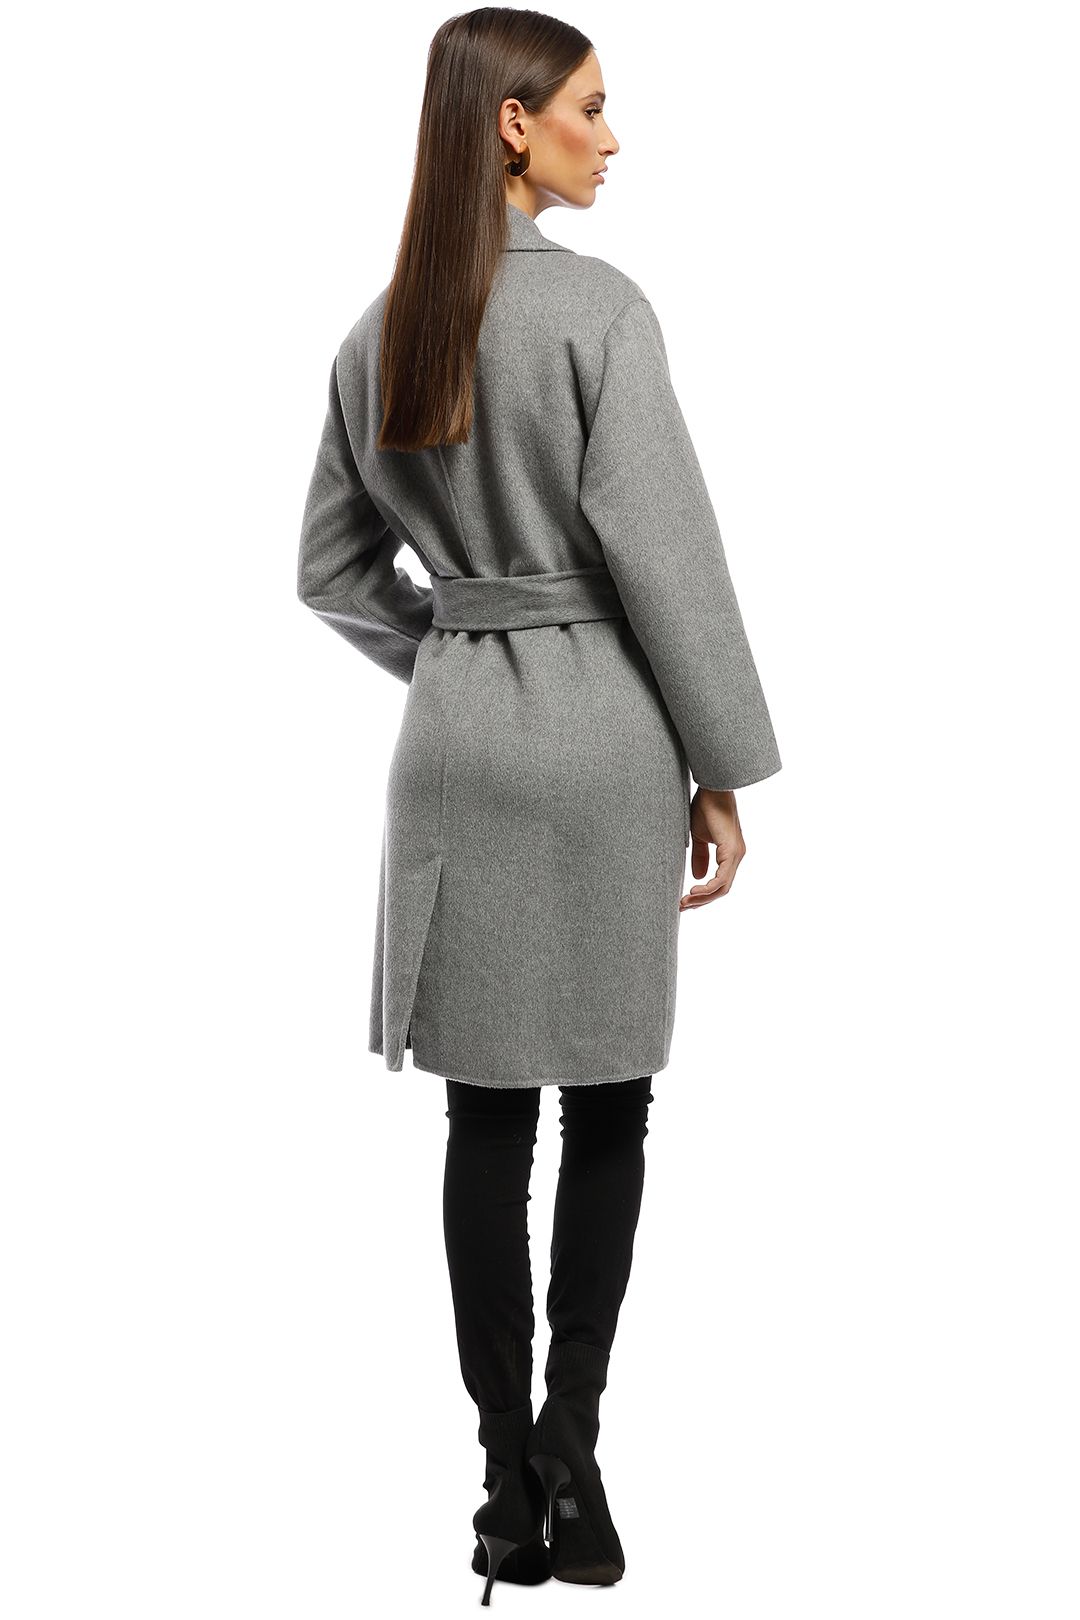 Rodeo Show - Chicago Coat - Light Grey - Back